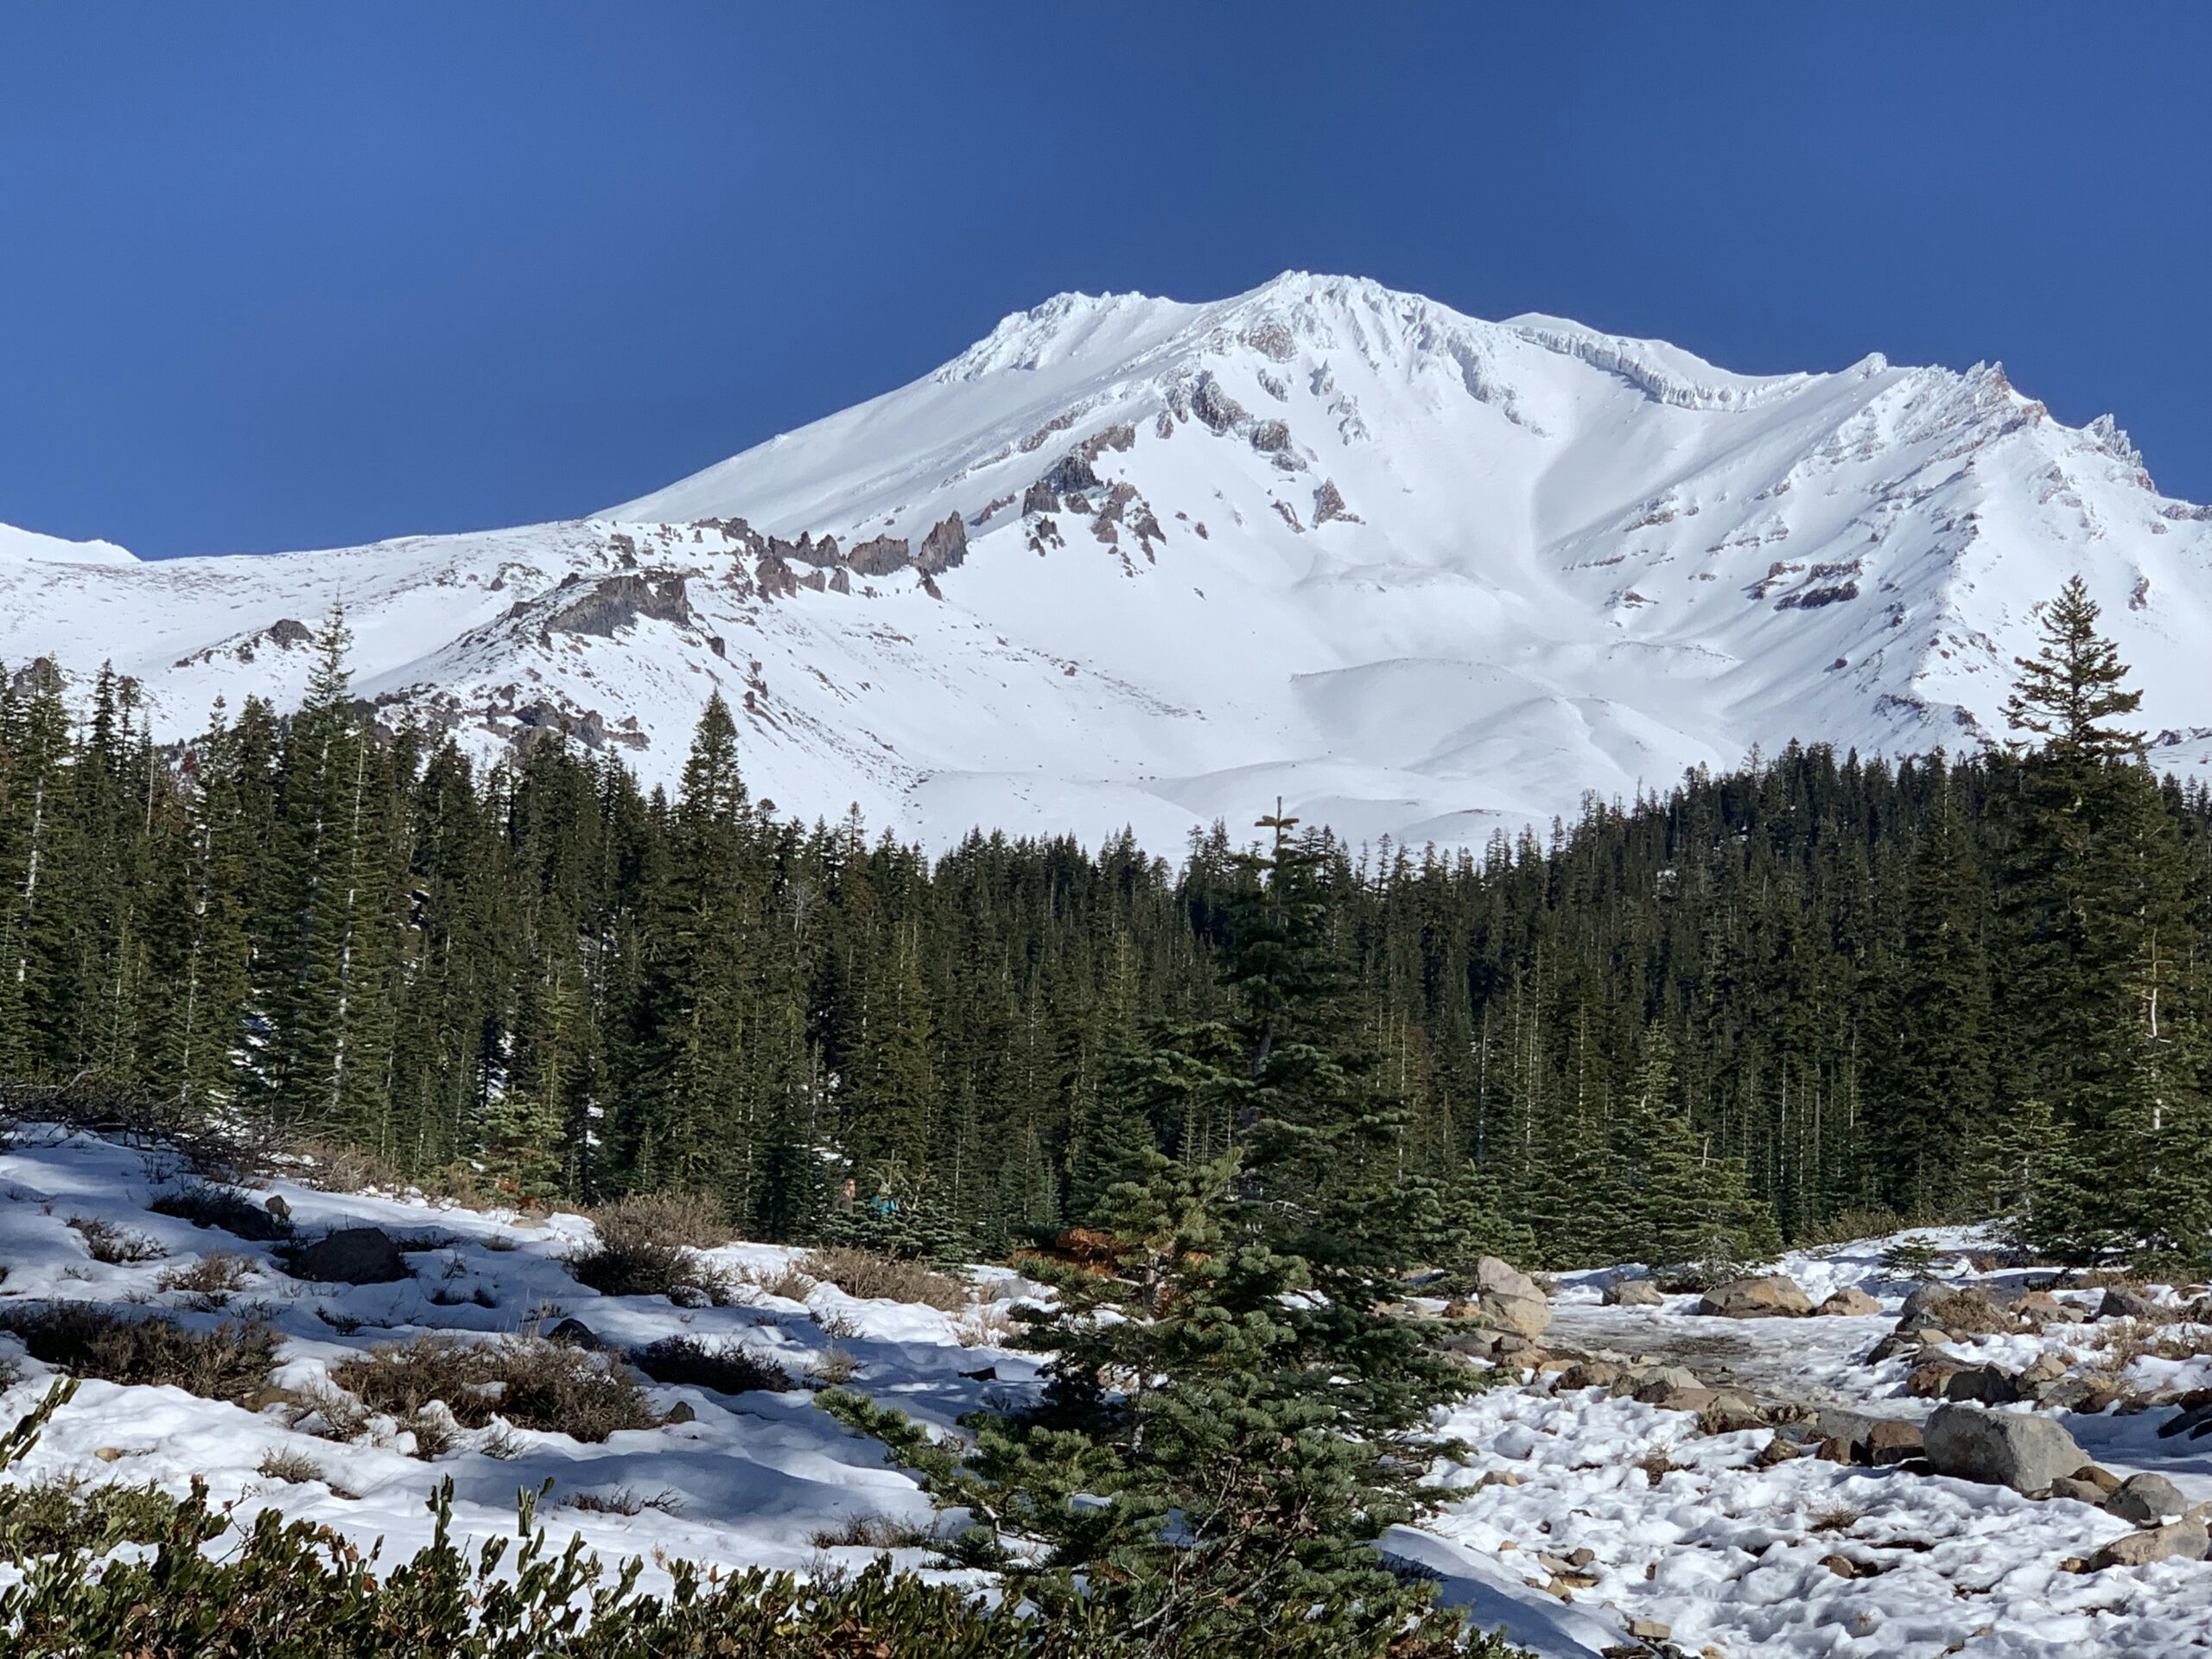 What Are The Risks Of Solo Climbing On Mount Shasta?